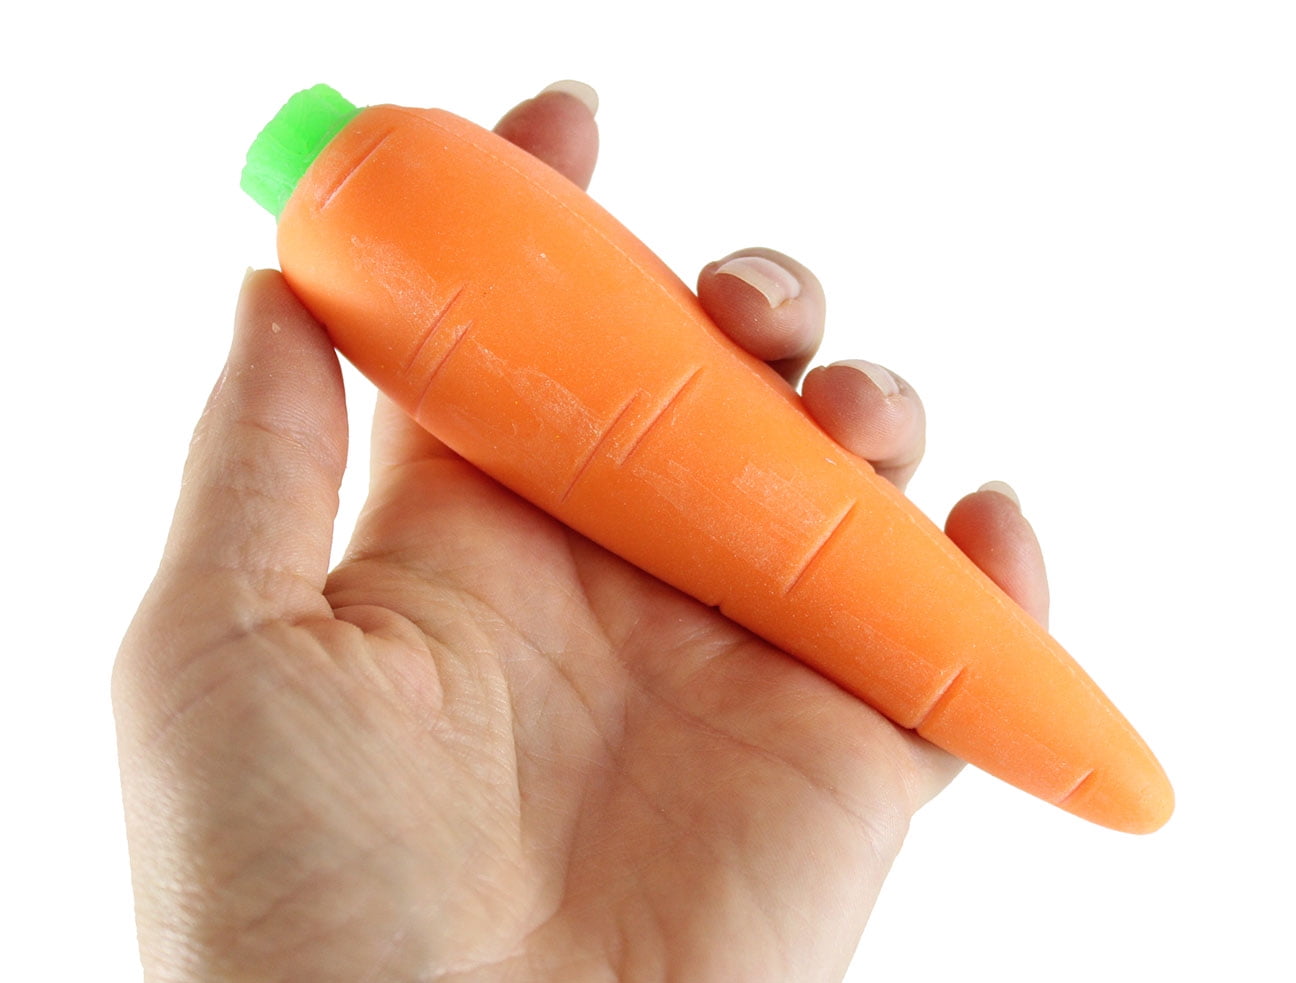 1 Squishy Sand-Filled Carrot - Moldable Sensory, Stress, Squeeze Fidget Toy  ADHD Special Needs Soothing Food OT Toy 